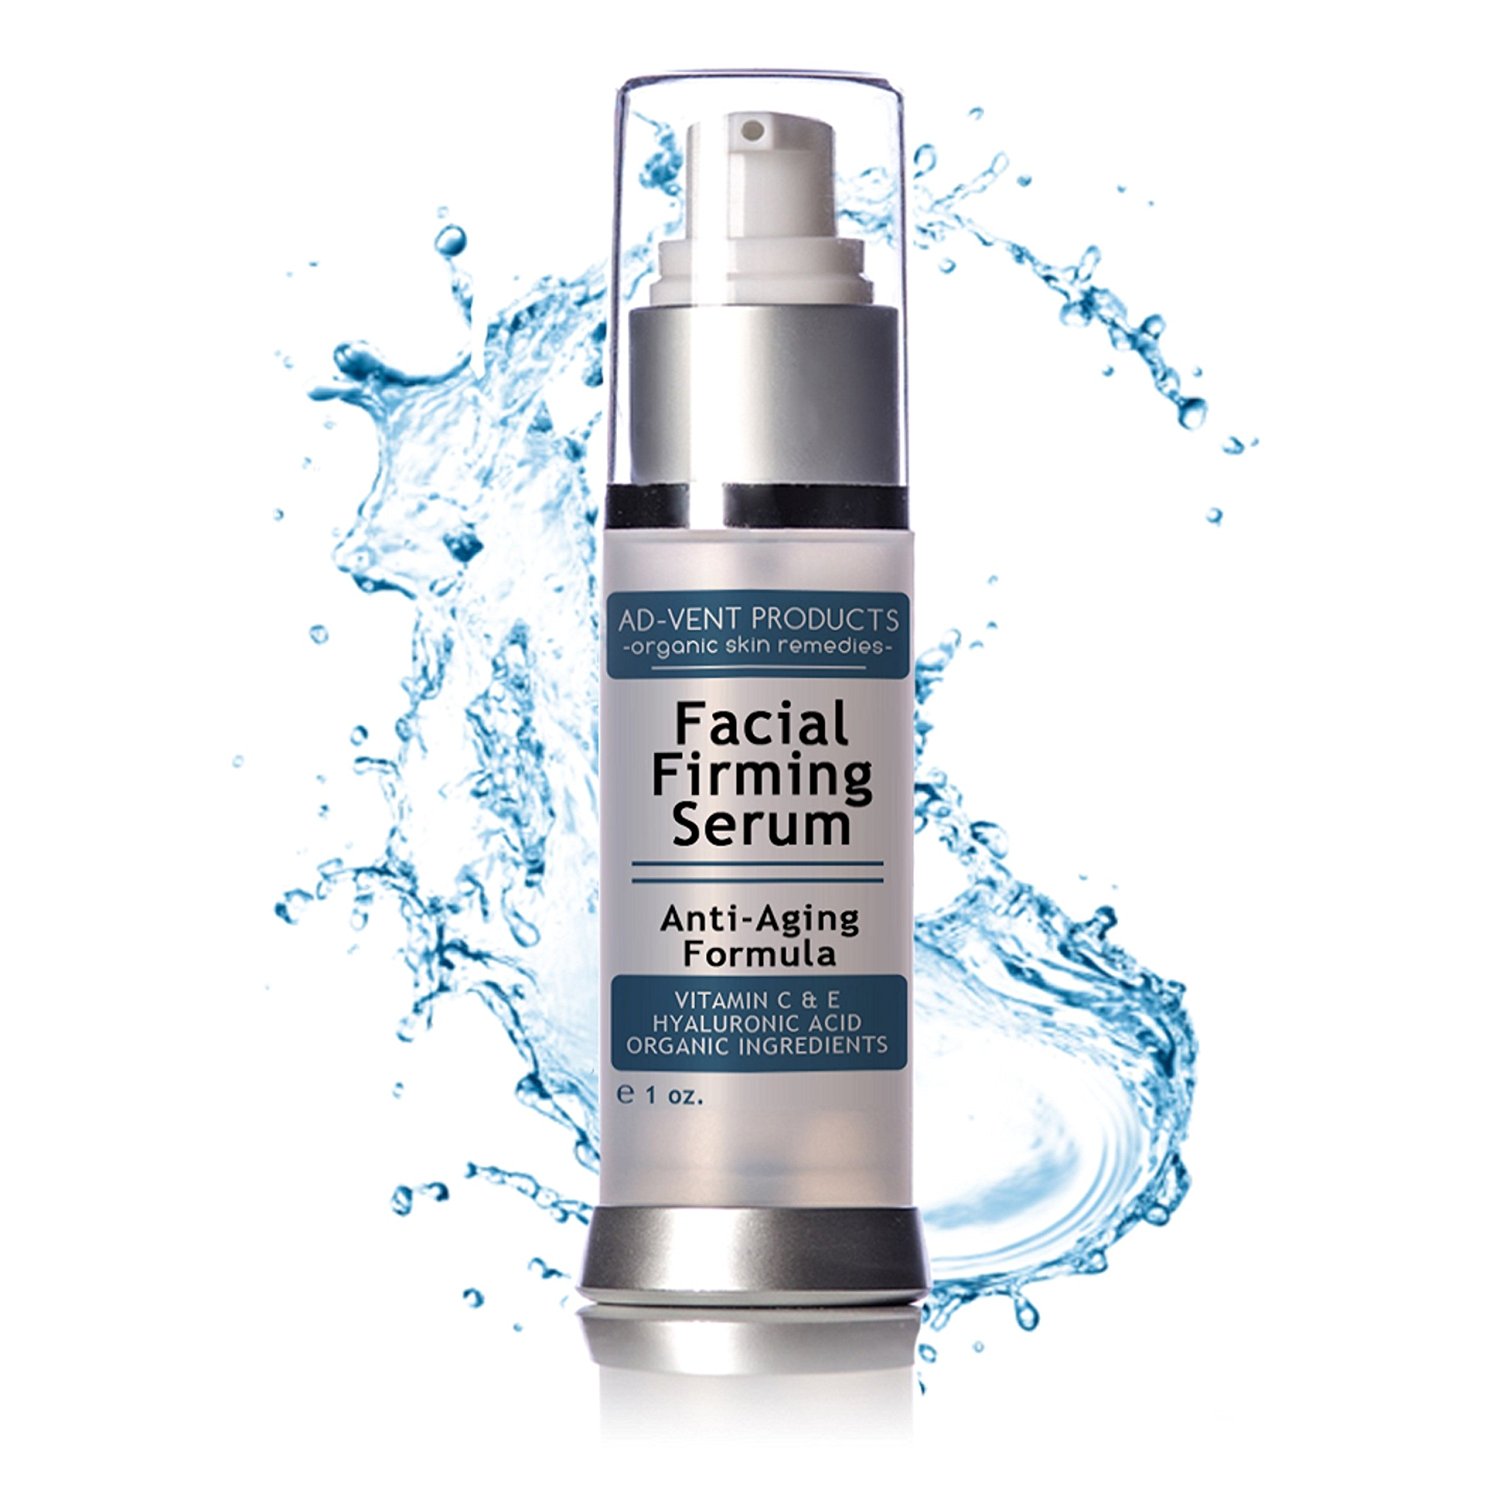 3-ad-vent-products-facial-firming-serum